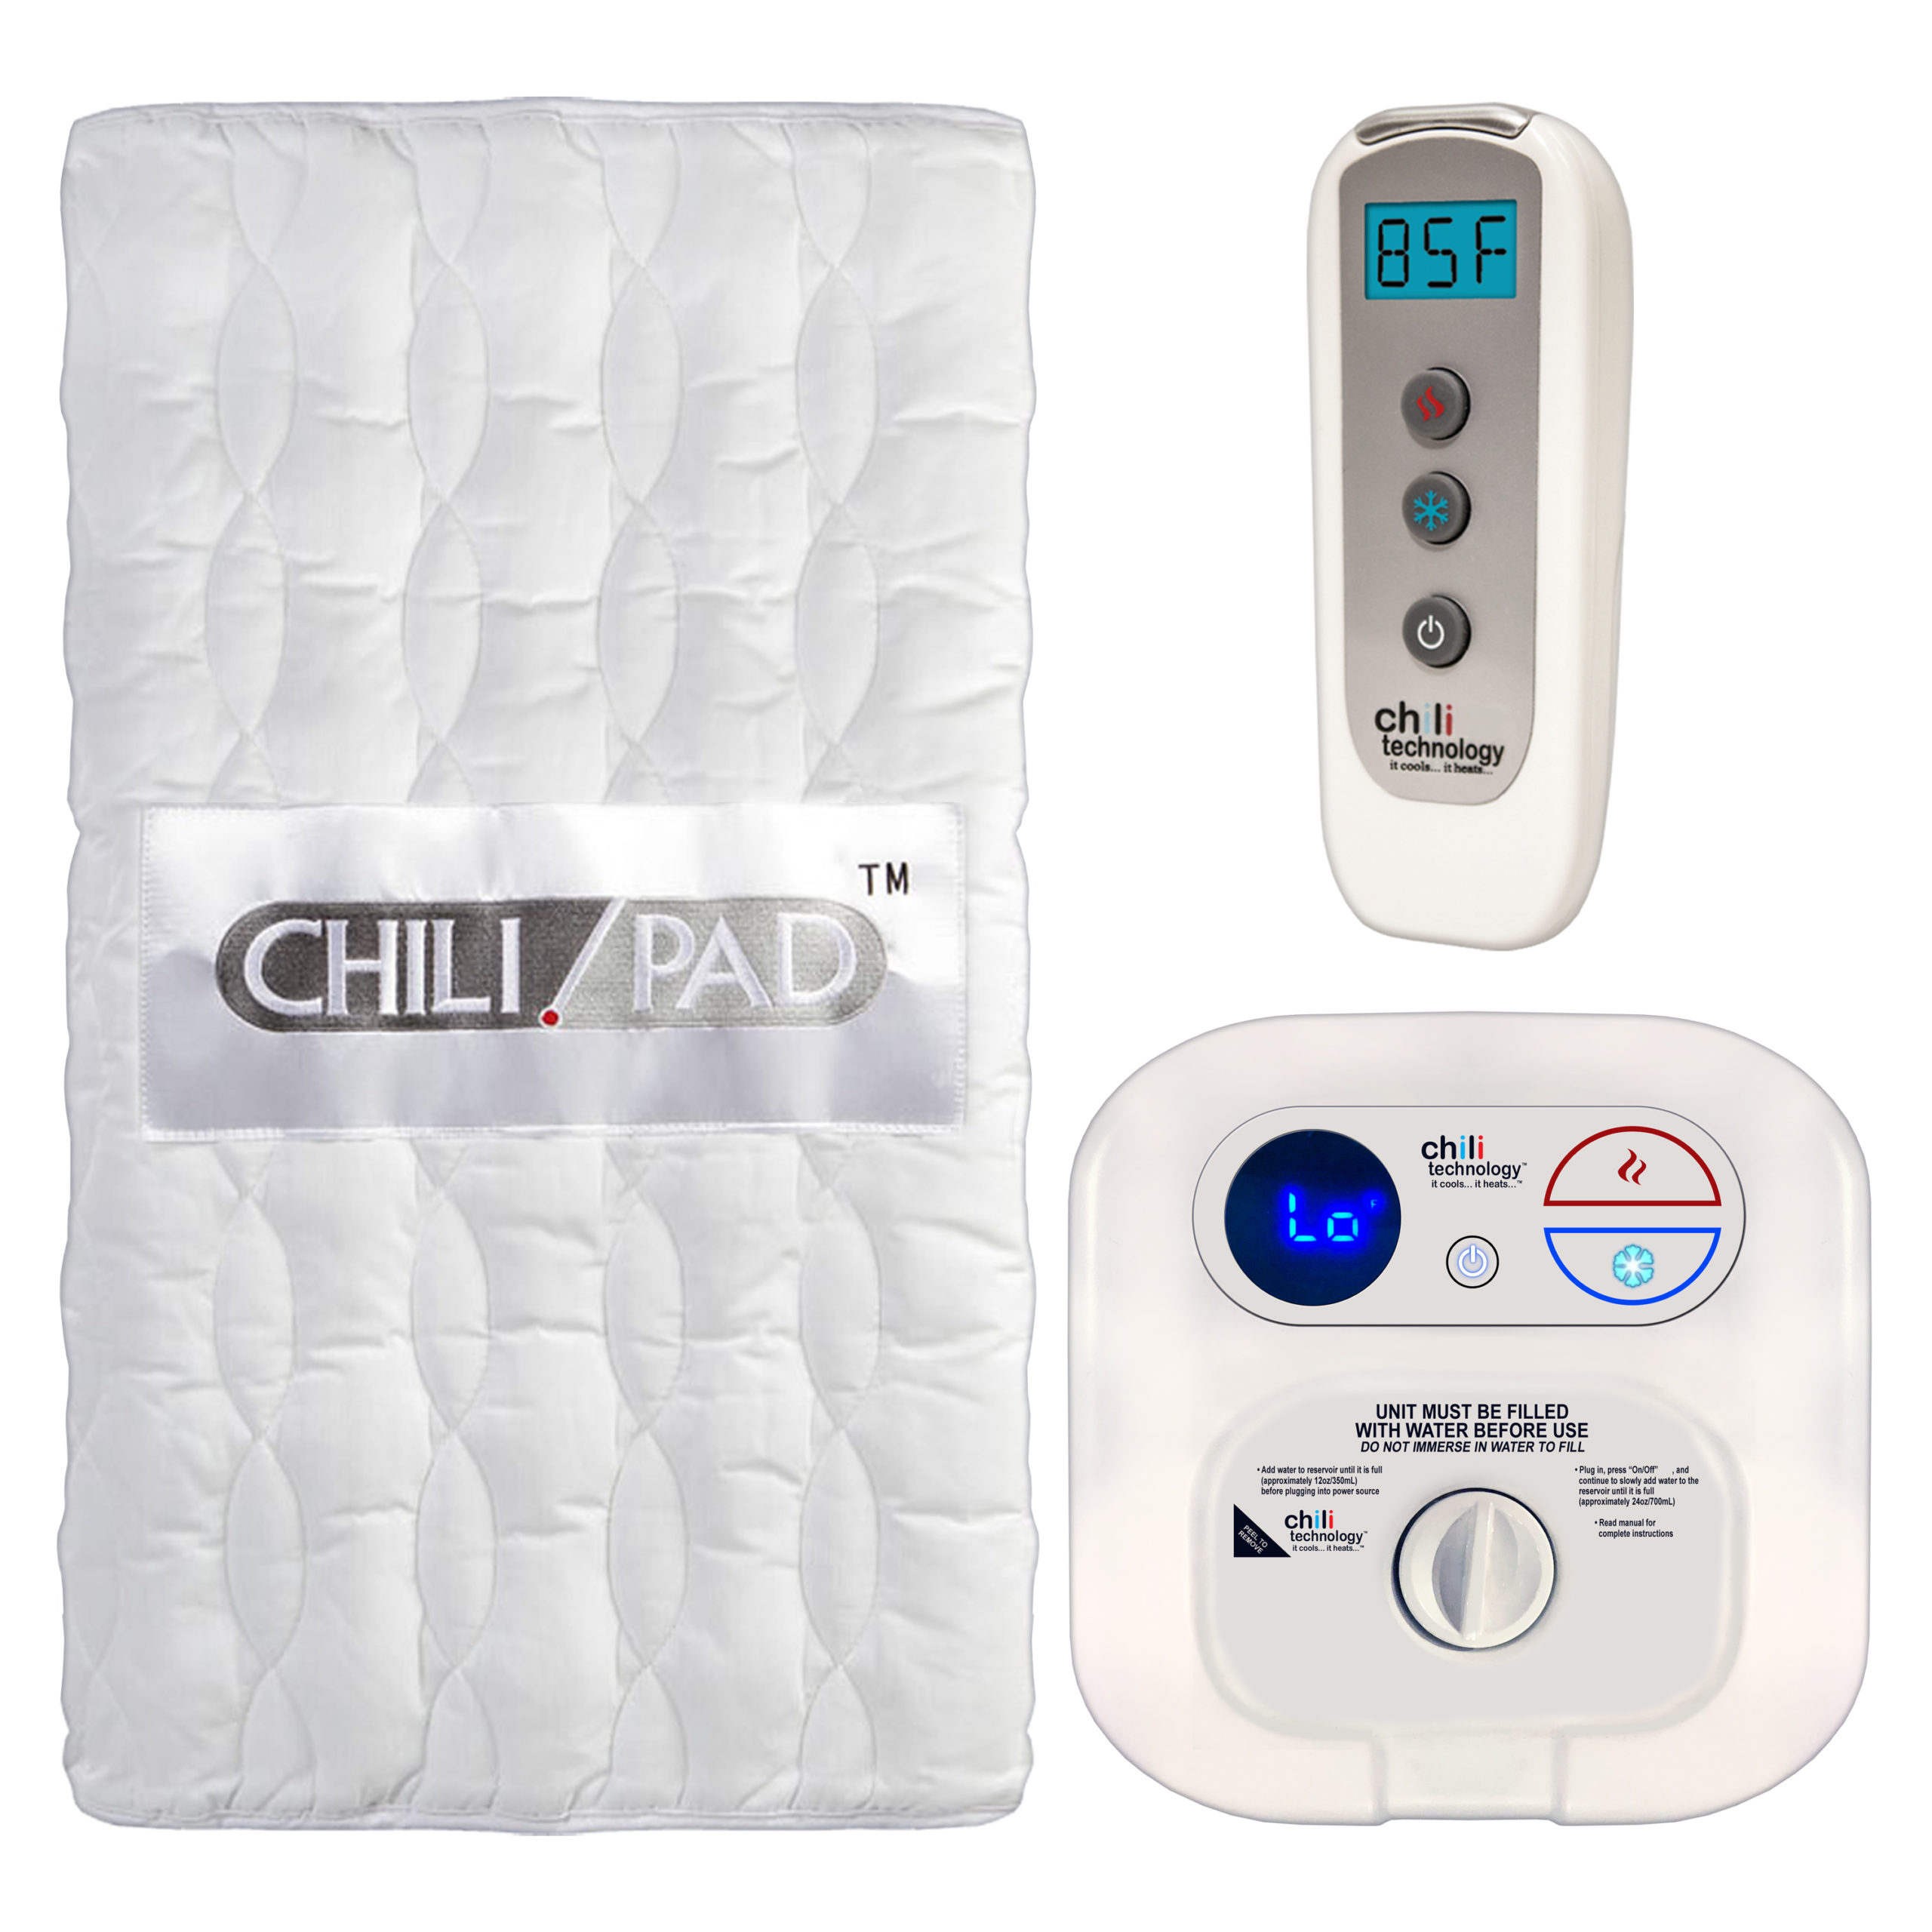 Childrens Electric Blanket - Chilipad|Temperature|Mattress|Cube|Sleep|Bed|Water|System|Pad|Ooler|Control|Unit|Night|Bedjet|Technology|Side|Air|Product|Review|Body|Time|Degrees|Noise|Price|Pod|Tubes|Heat|Device|Cooling|Room|King|App|Features|Size|Cover|Sleepers|Sheets|Energy|Warranty|Quality|Mattress Pad|Control Unit|Cube Sleep System|Sleep Pod|Distilled Water|Remote Control|Sleep System|Desired Temperature|Water Tank|Chilipad Cube|Chili Technology|Deep Sleep|Pro Cover|Ooler Sleep System|Hydrogen Peroxide|Cool Mesh|Sleep Temperature|Fitted Sheet|Pod Pro|Sleep Quality|Smartphone App|Sleep Systems|Chilipad Sleep System|New Mattress|Sleep Trial|Full Refund|Mattress Topper|Body Heat|Air Flow|Chilipad Review